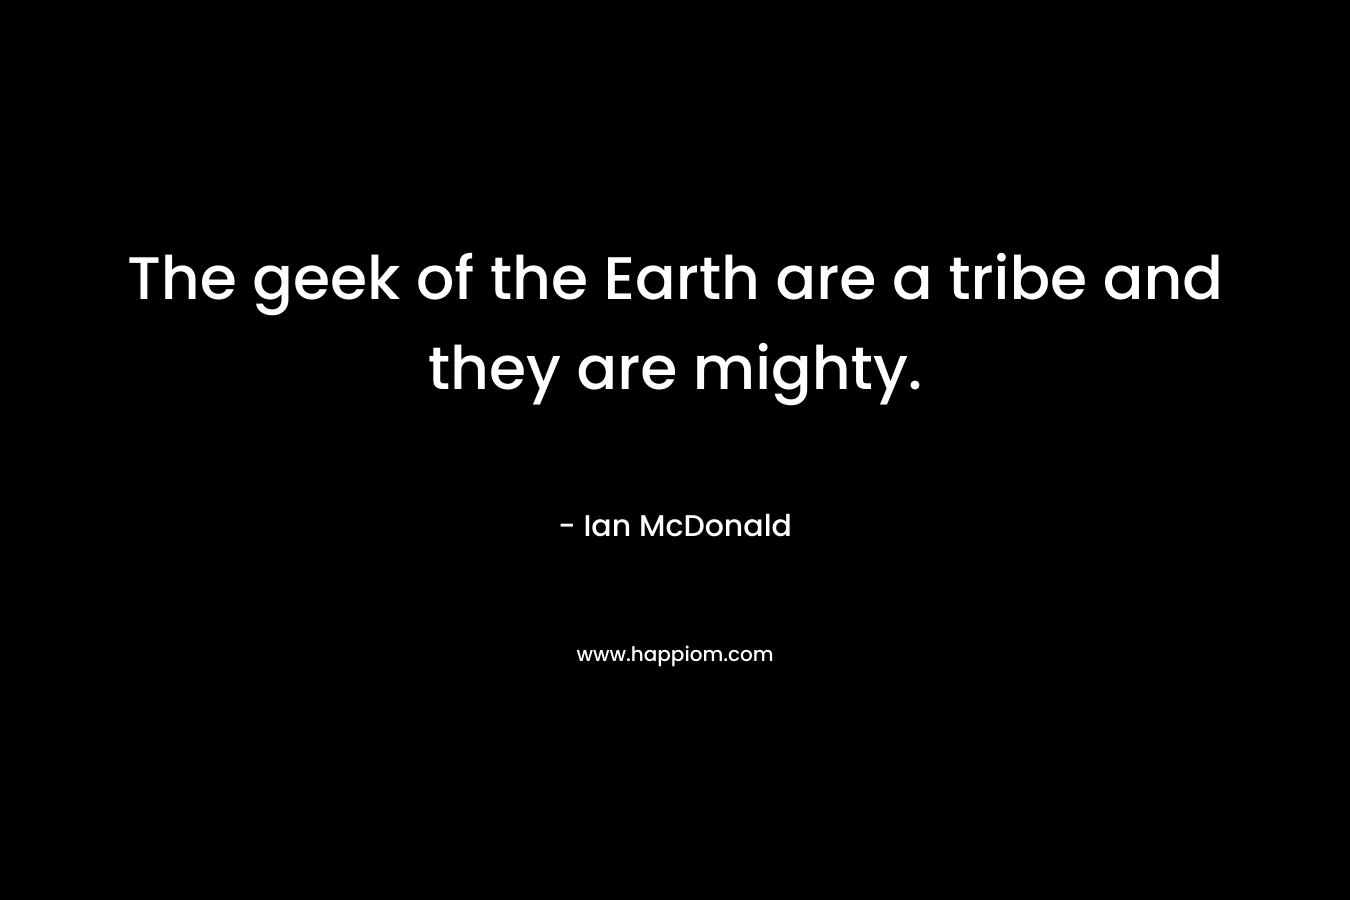 The geek of the Earth are a tribe and they are mighty. – Ian McDonald